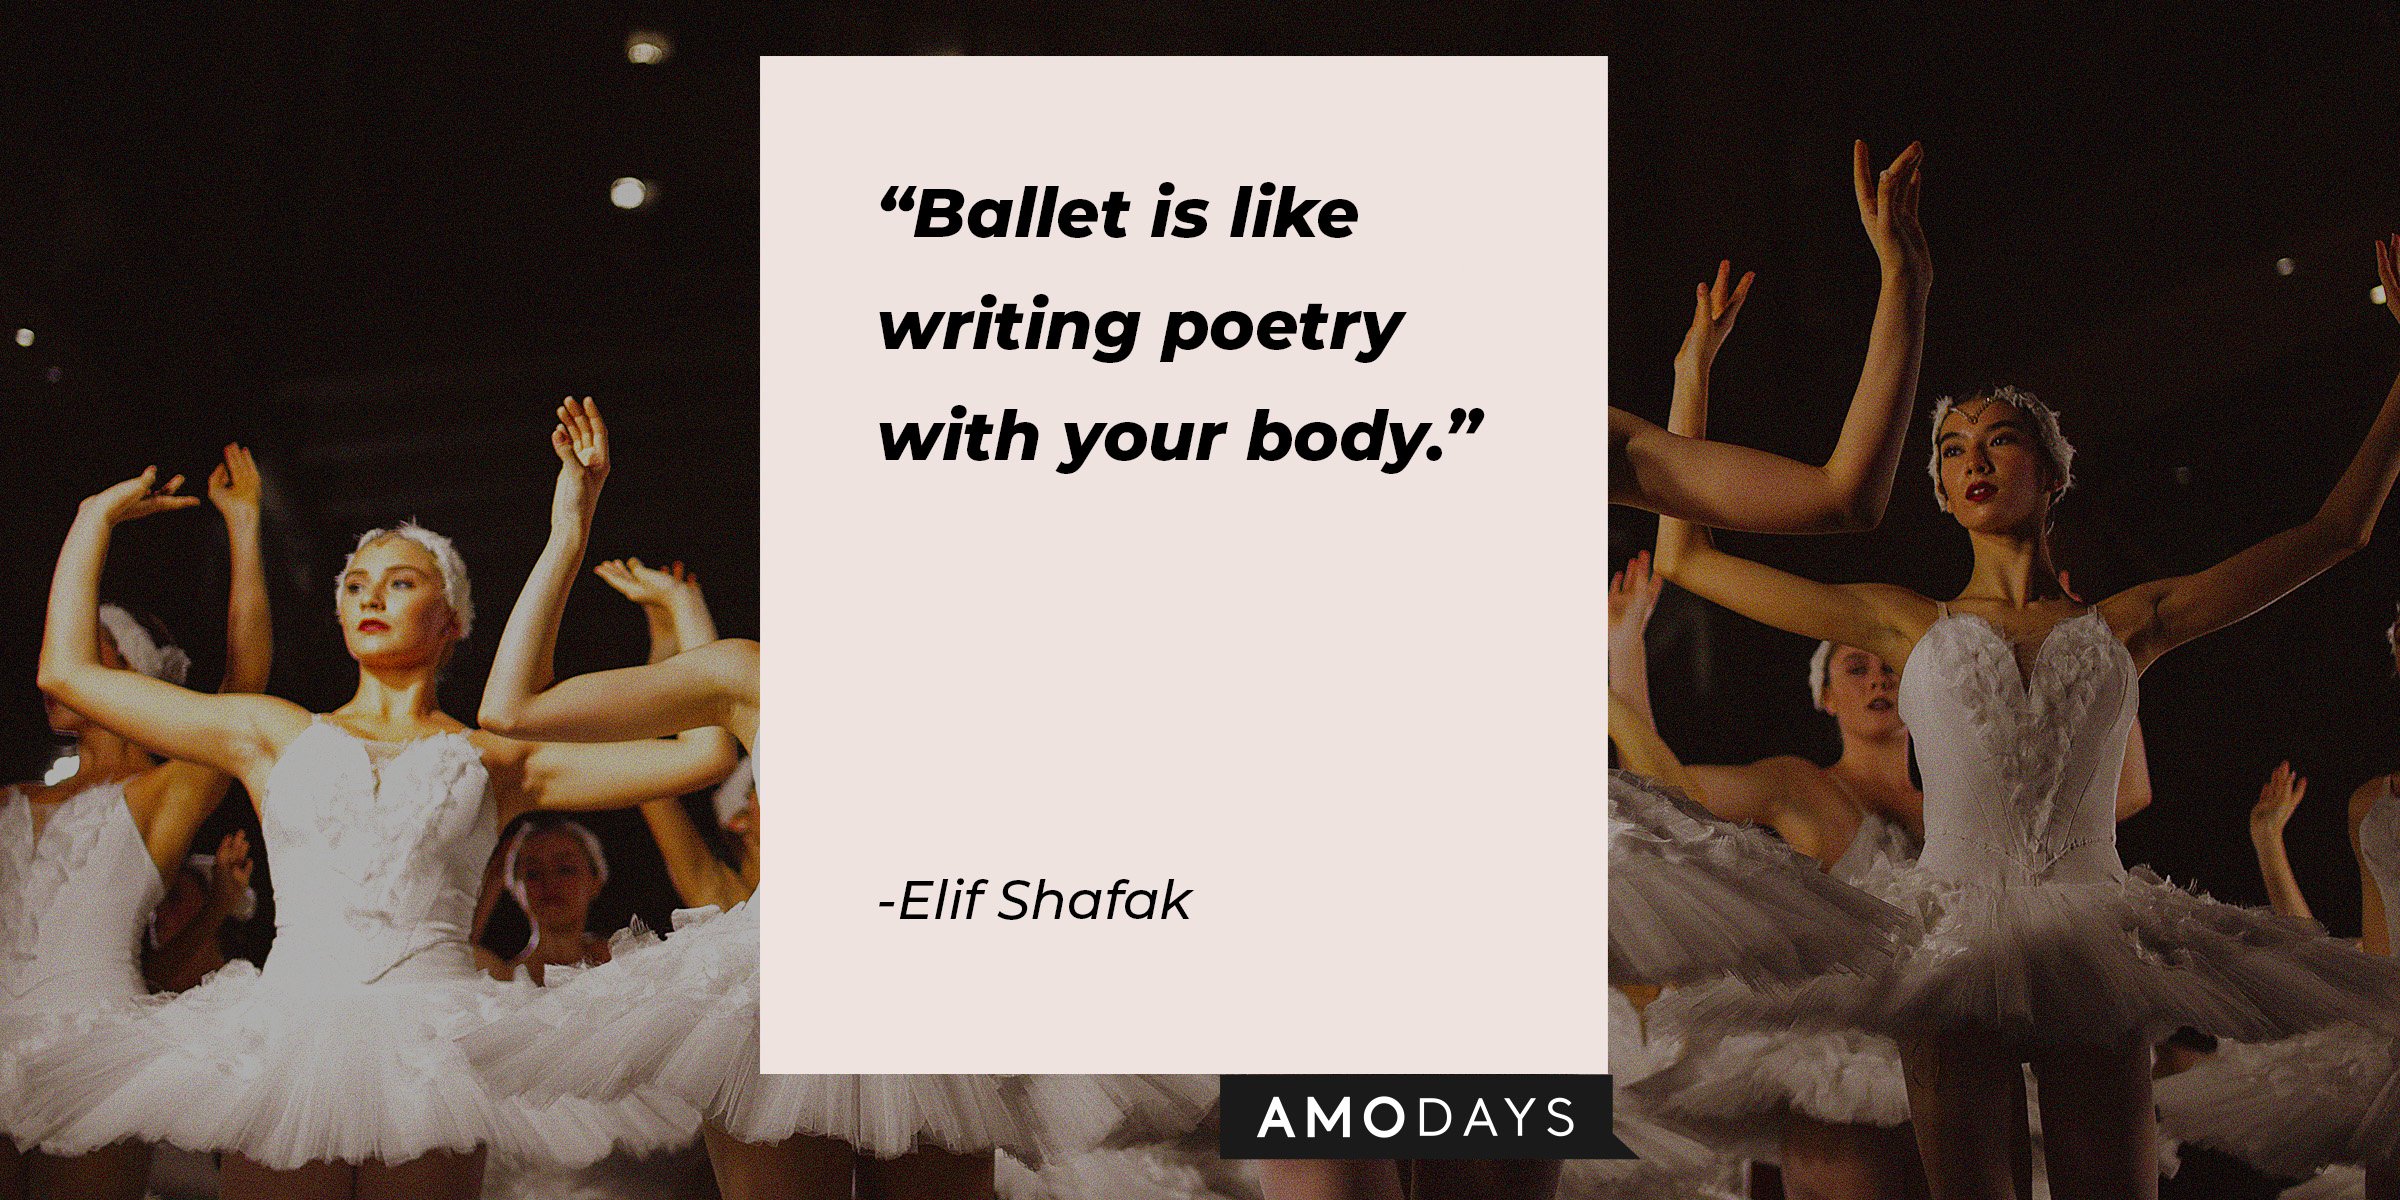 Unsplash | Ballerinas dancing with the quote,  "Ballet is like writing poetry with your body," by Elif Shafak